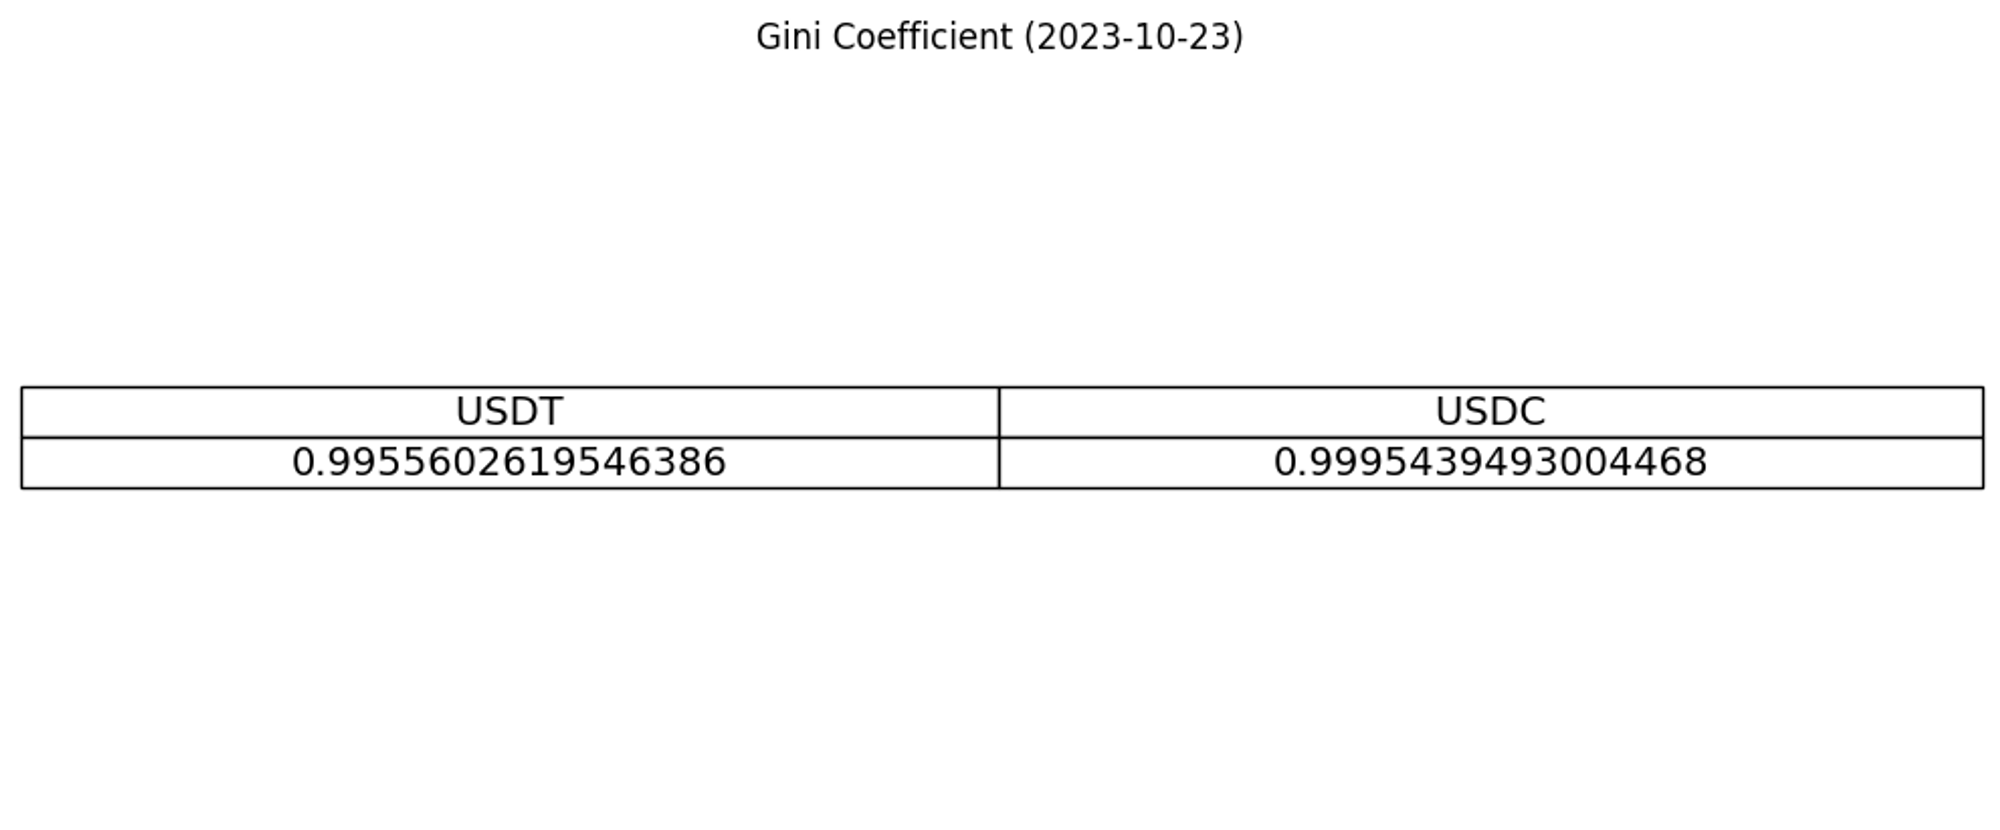 Gini coefficient for USDC and USDT